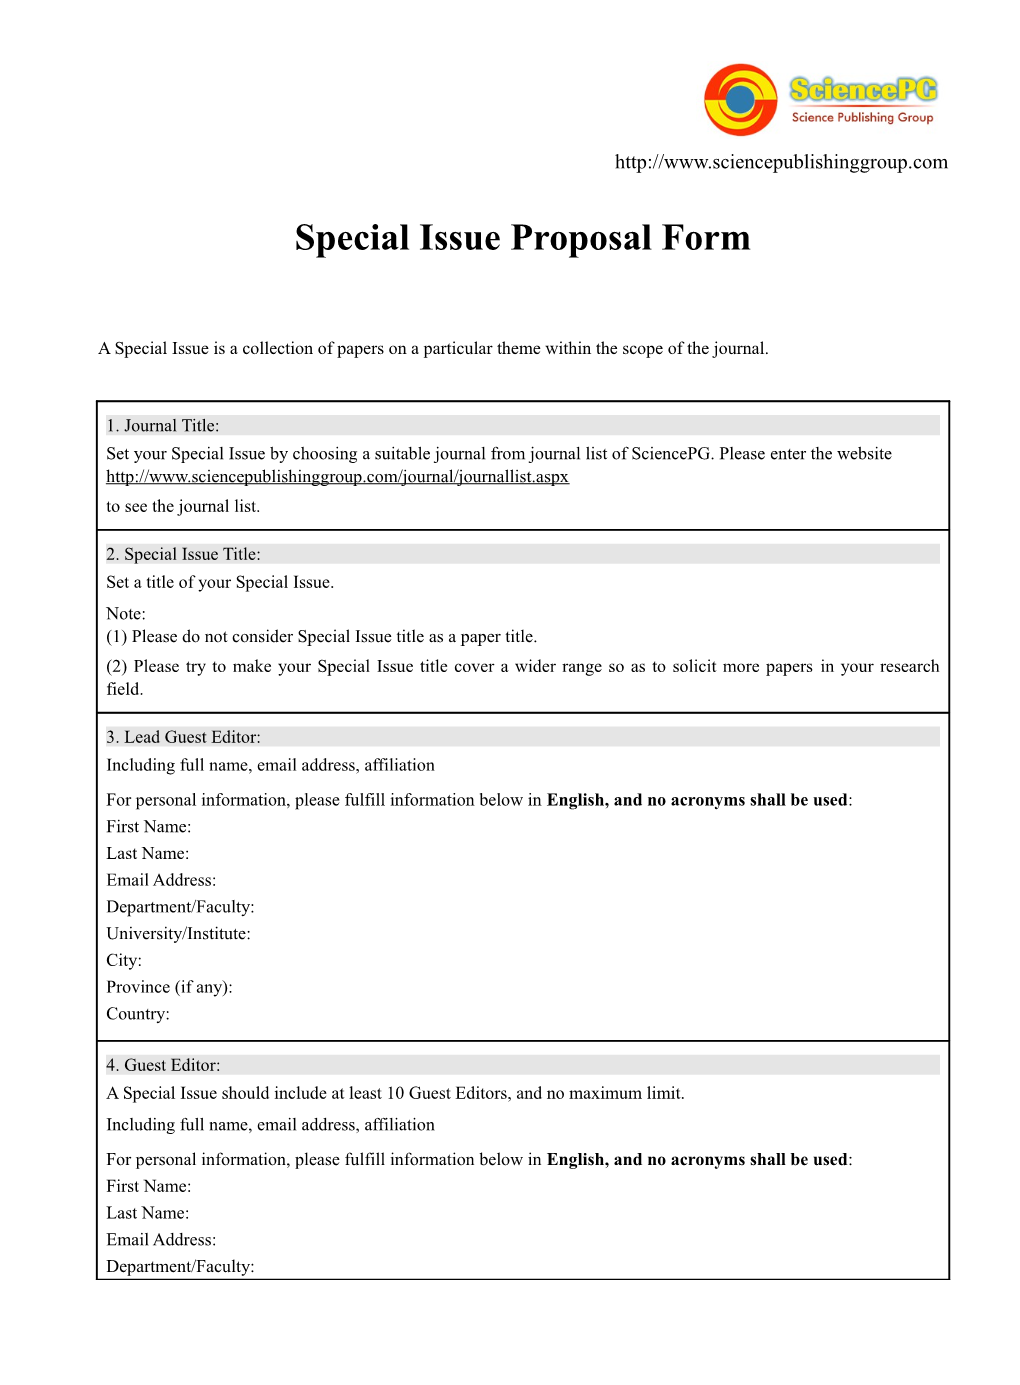 Special Issue Proposal Form